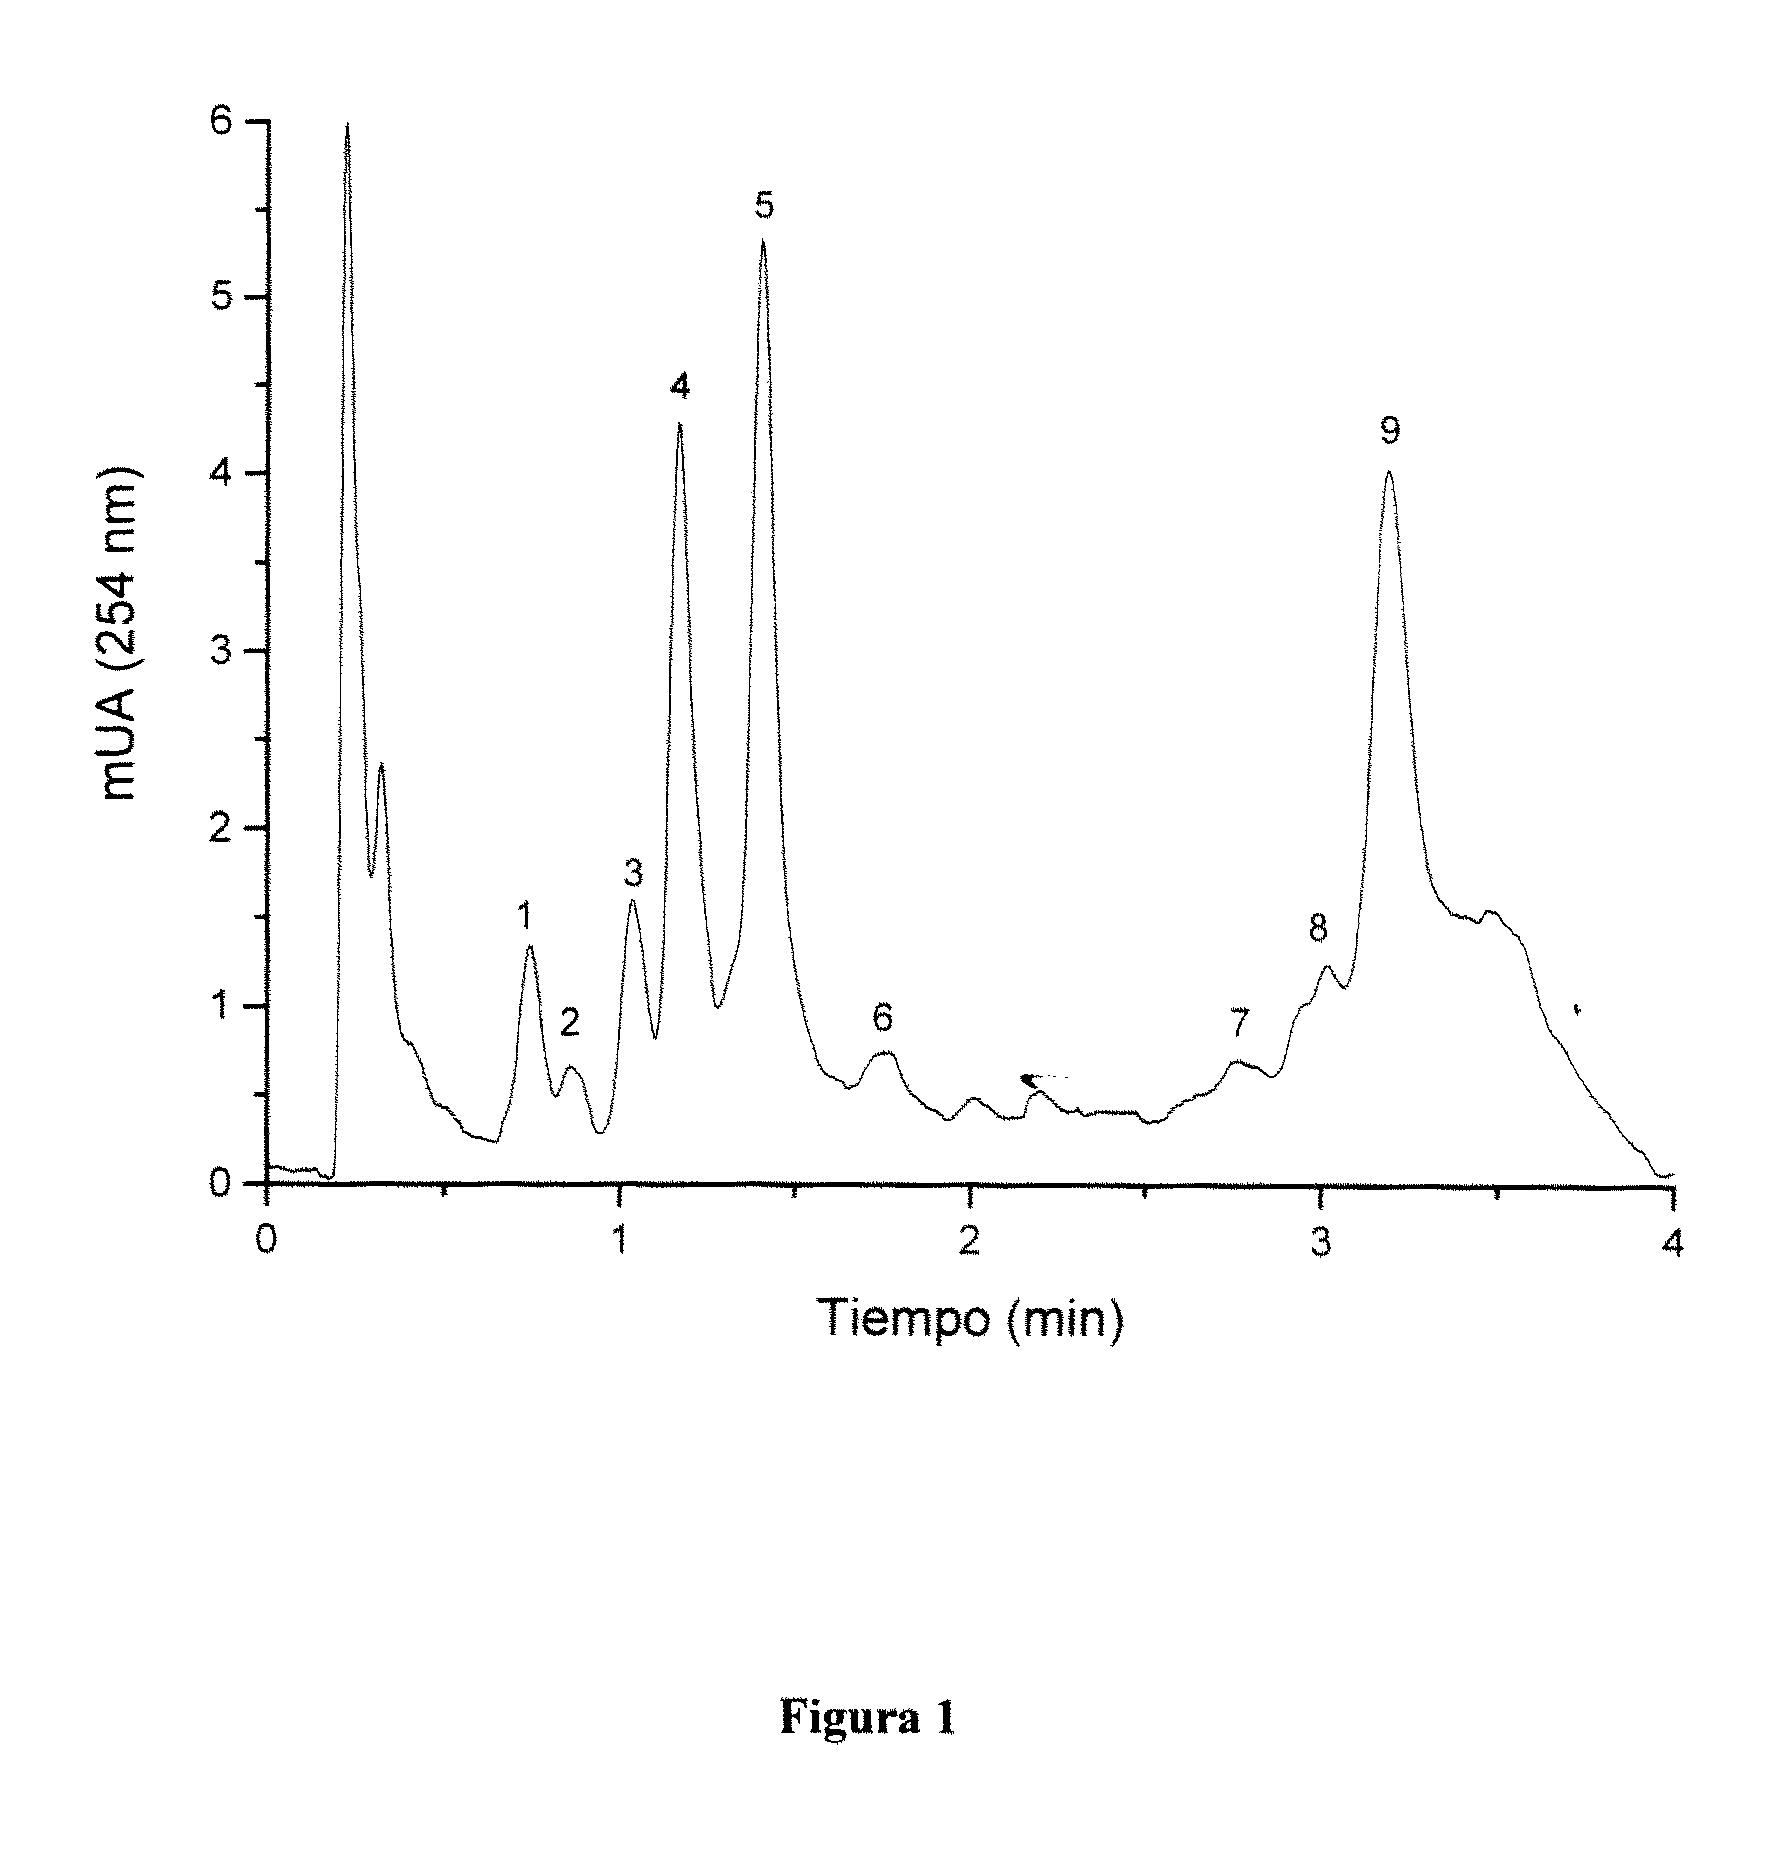 Procedure for estimating the content of 7S and 11S globulins in soybeans by Perfusion reversed-phase high-performance liquid chromatography.